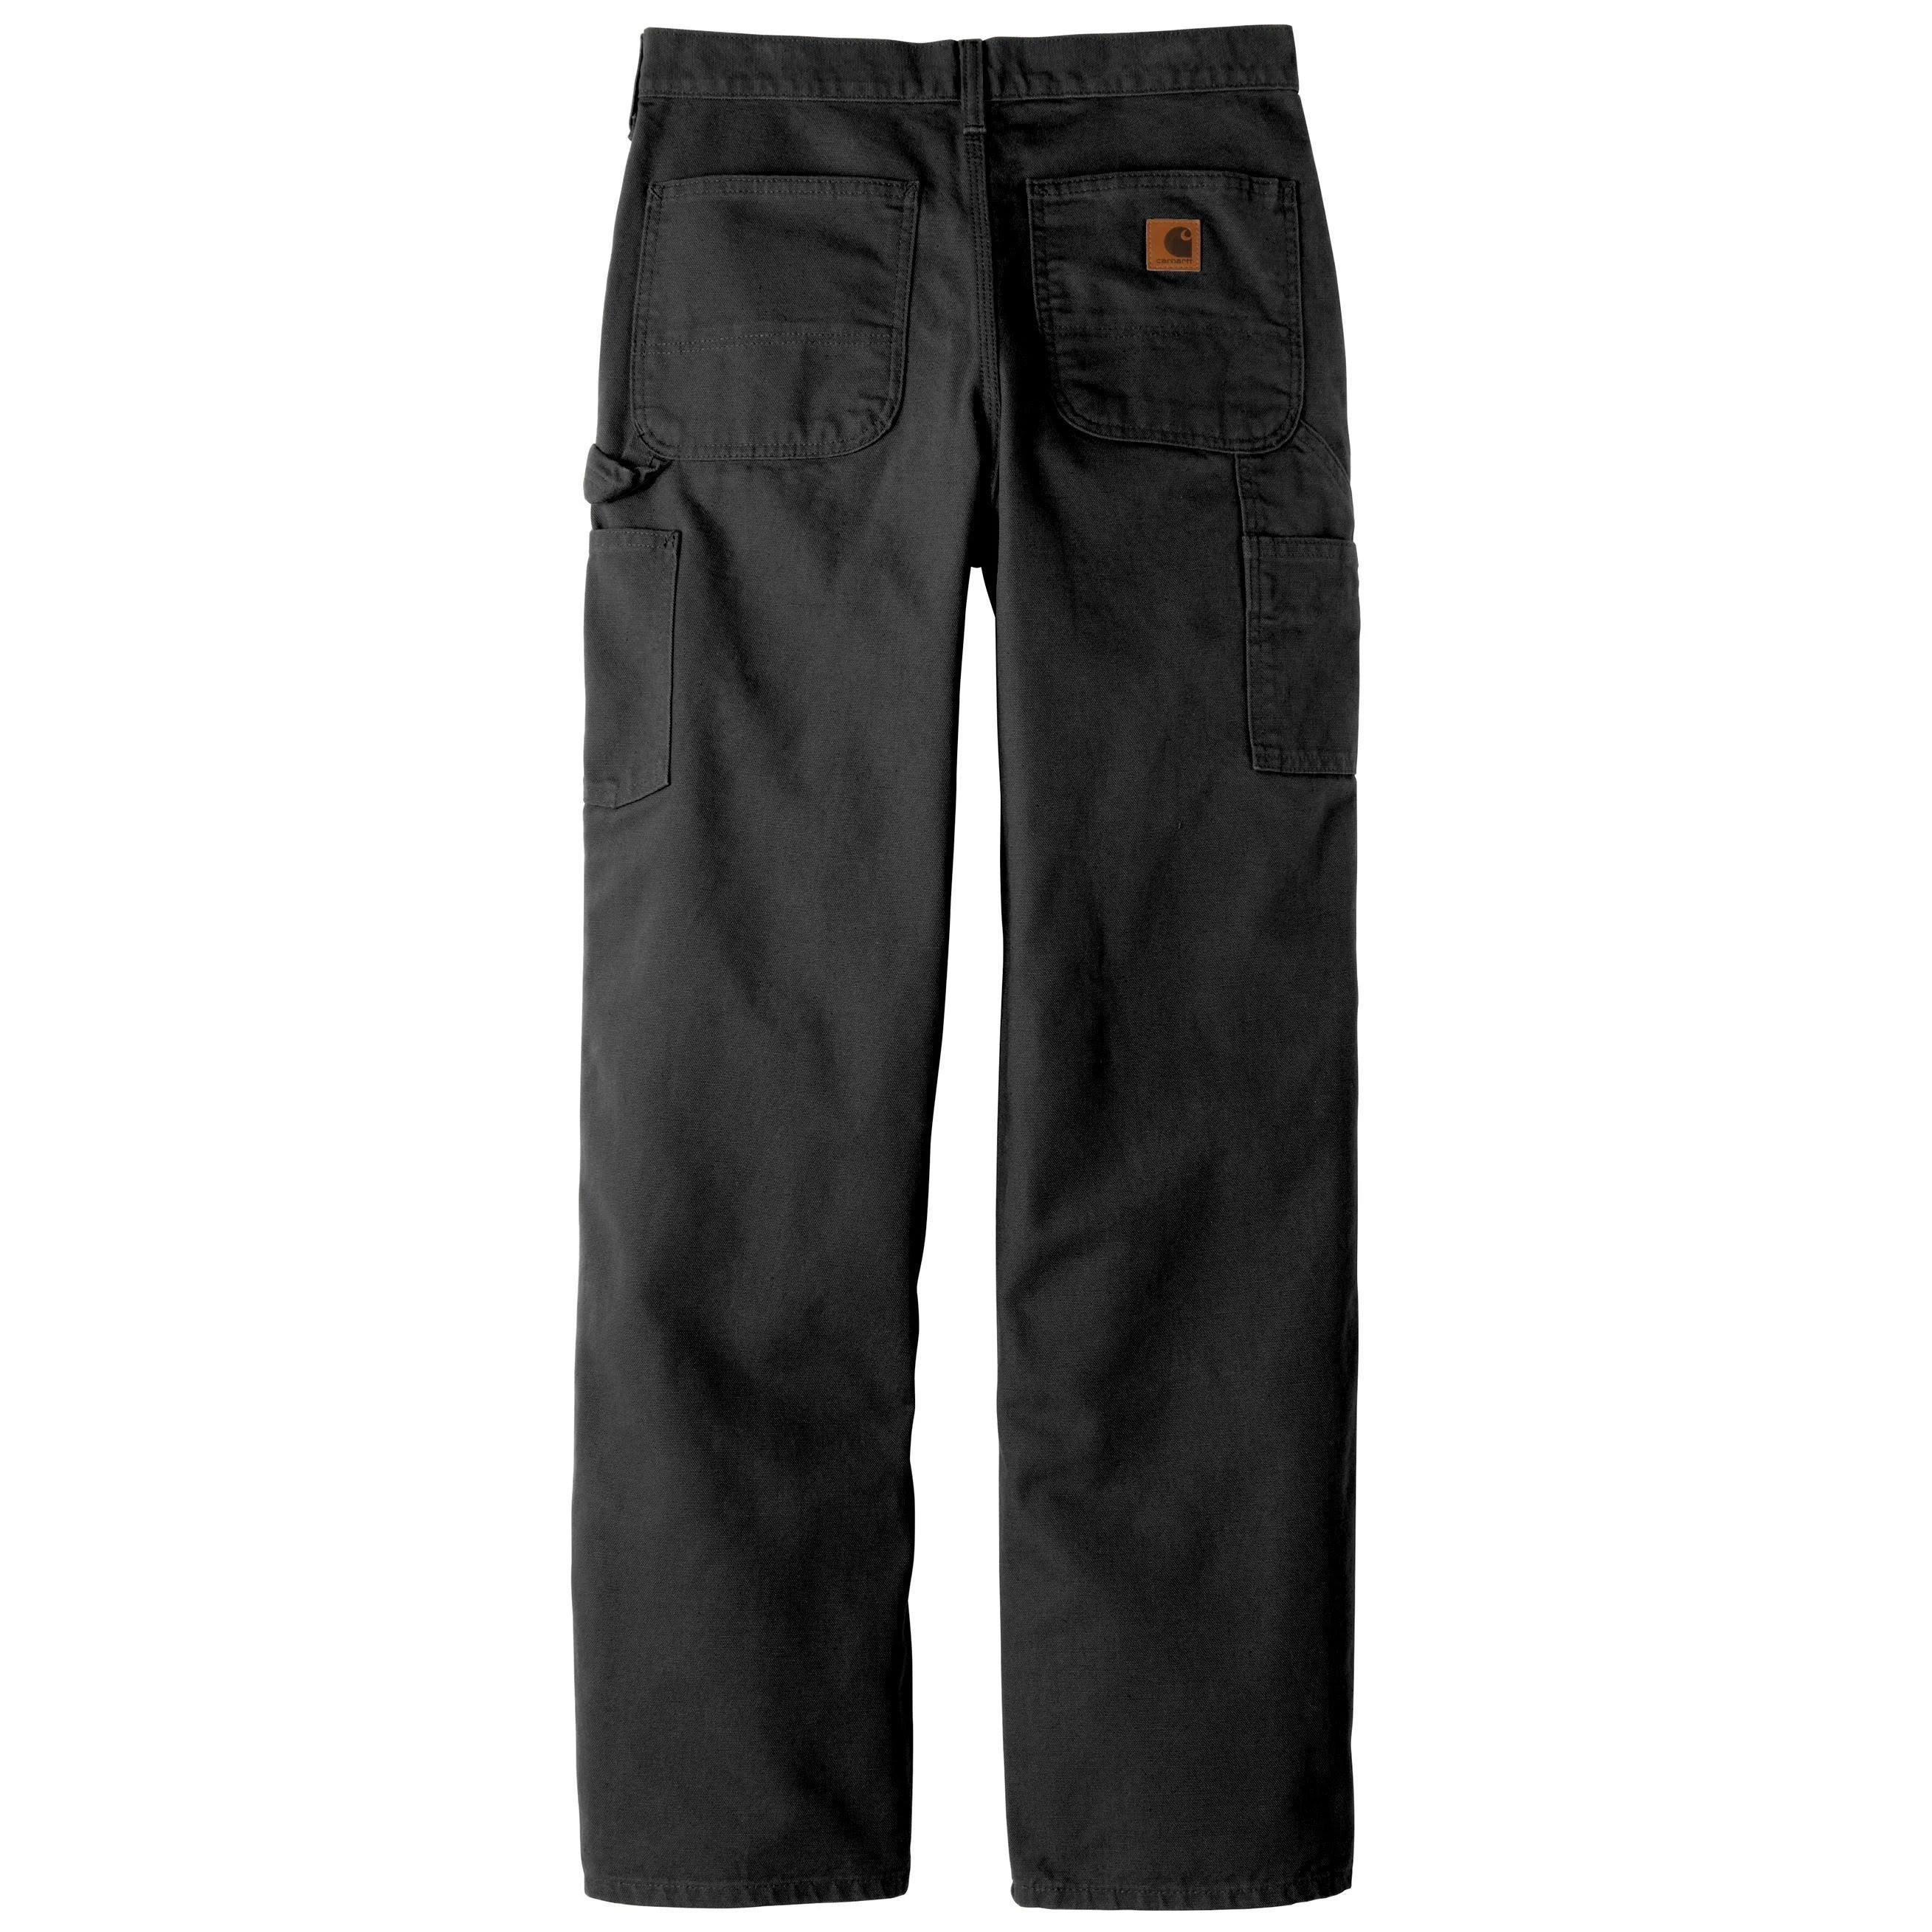 B11 - Men's Washed Duck Work Dungaree - Black - Purpose-Built / Home of the Trades